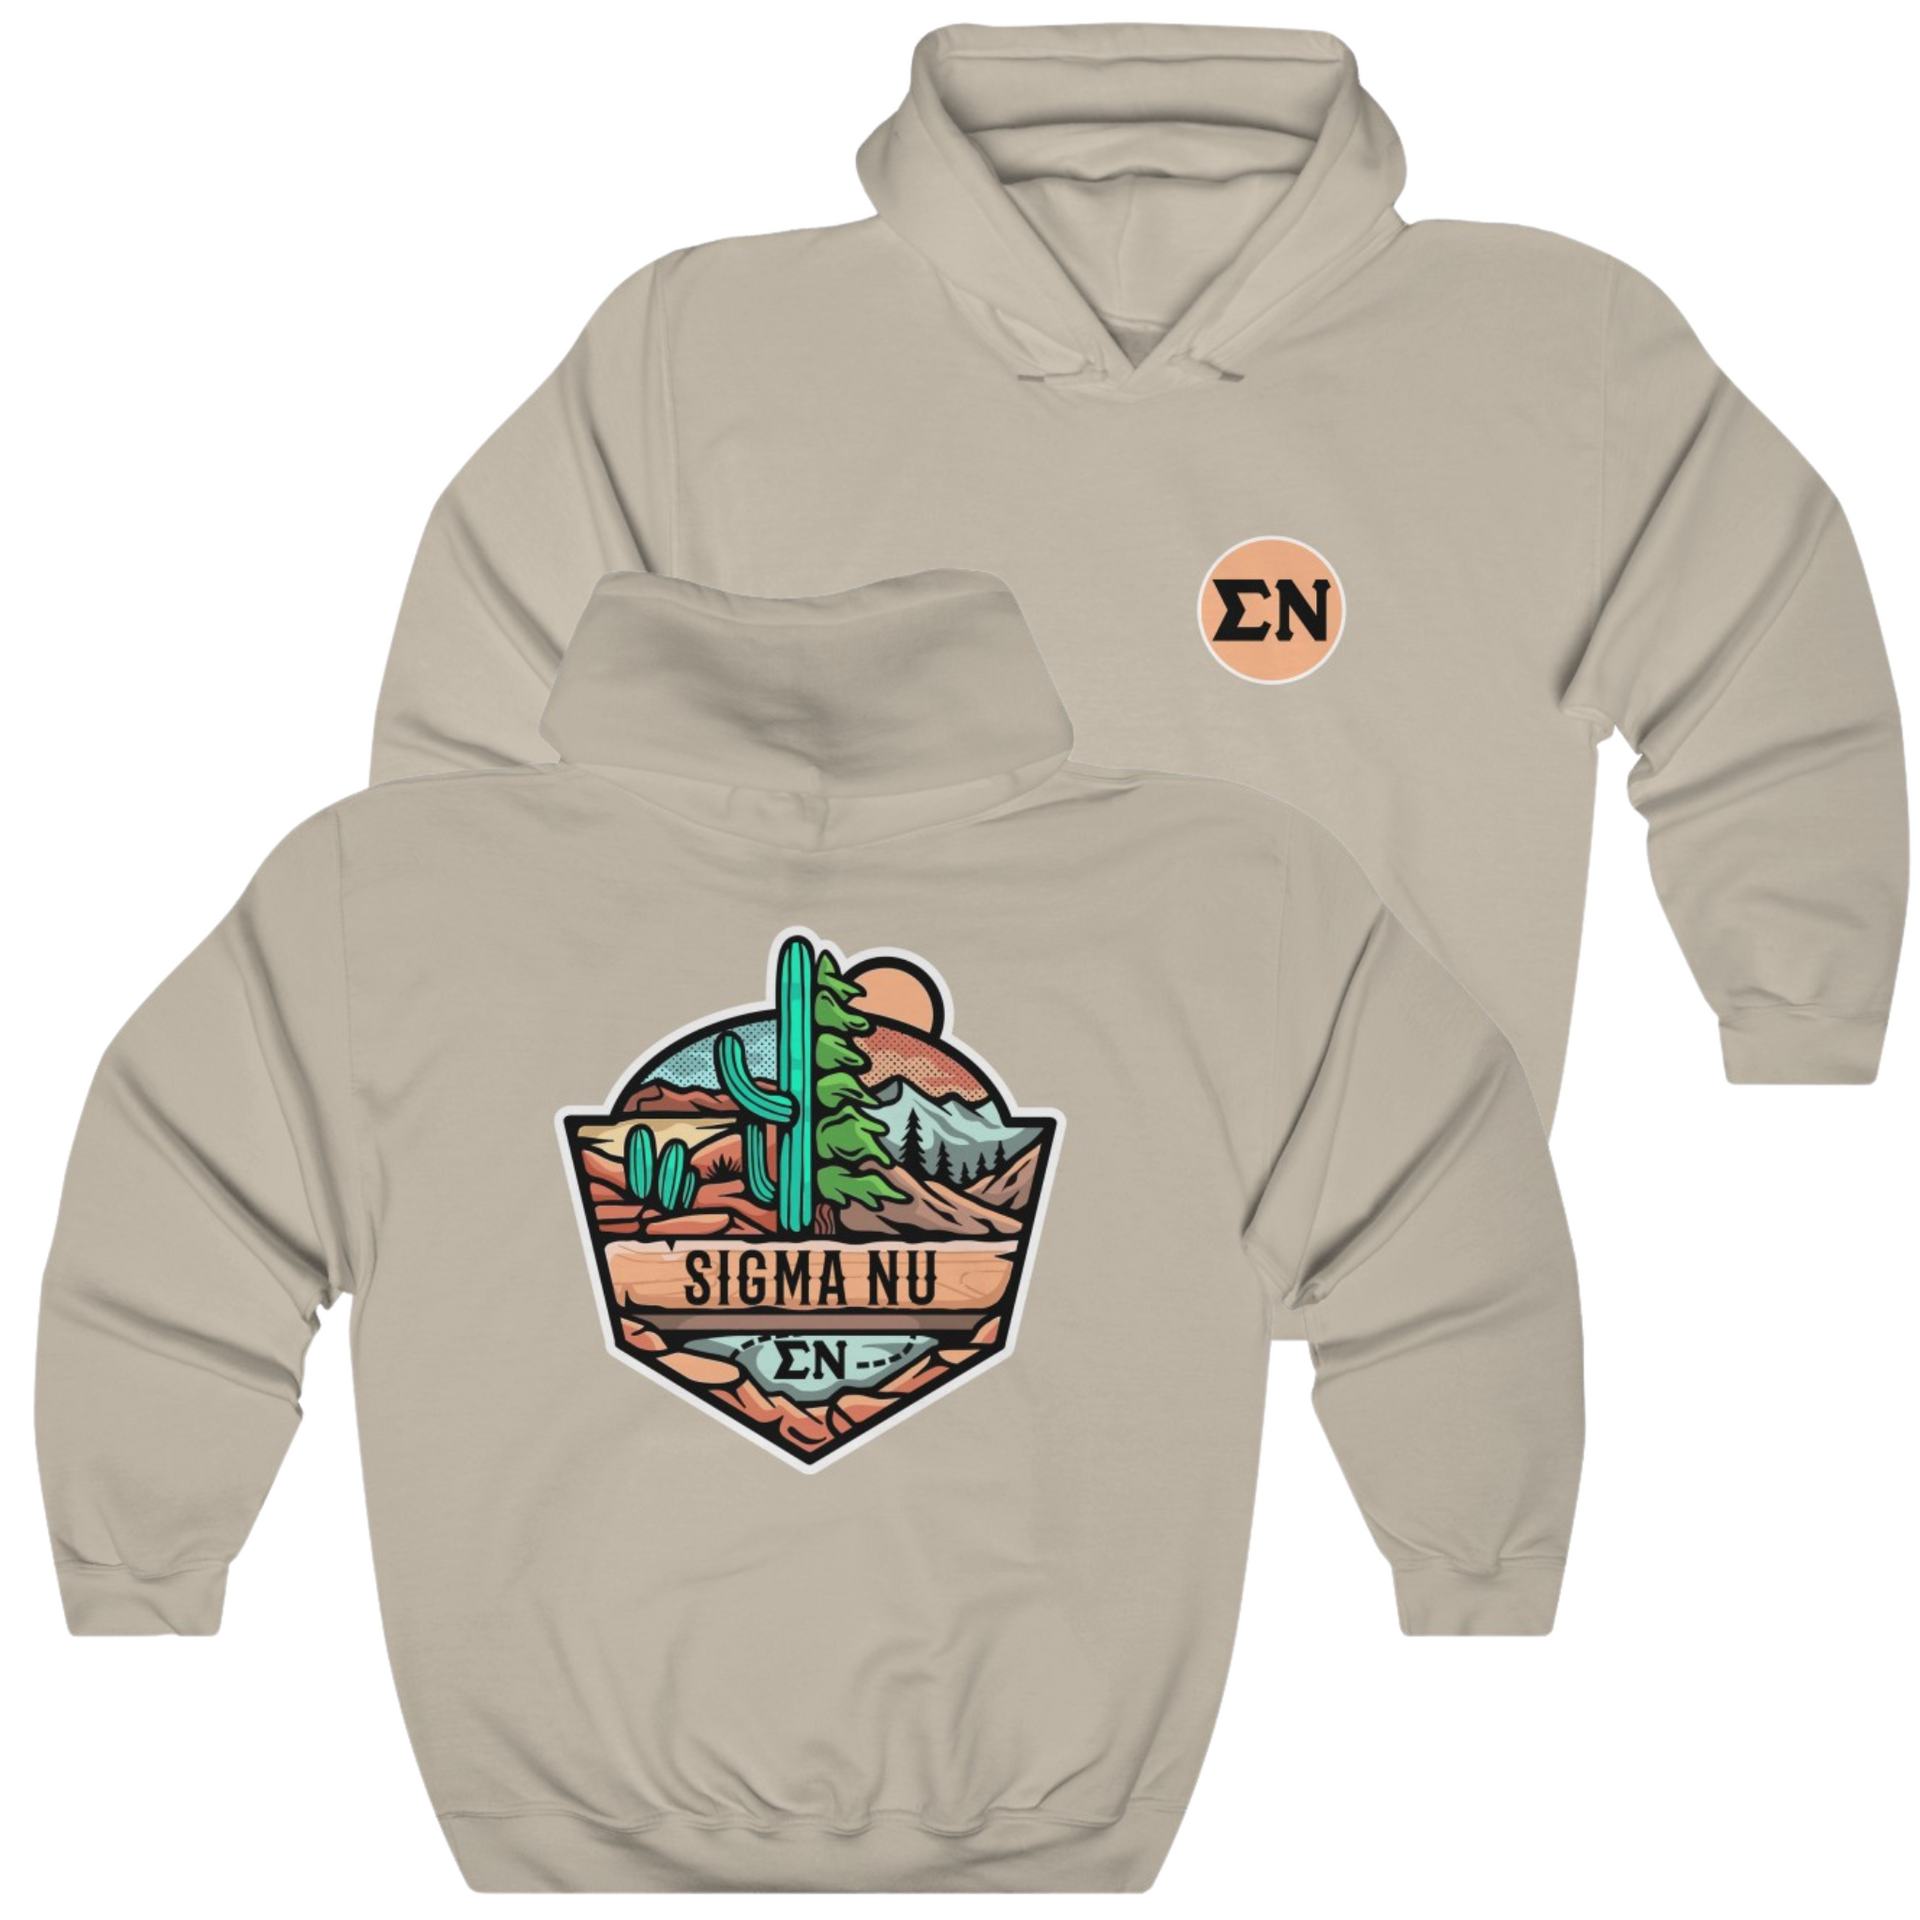 Sand Sigma Nu Graphic Hoodie | Desert Mountains | Sigma Nu Clothing, Apparel and Merchandise